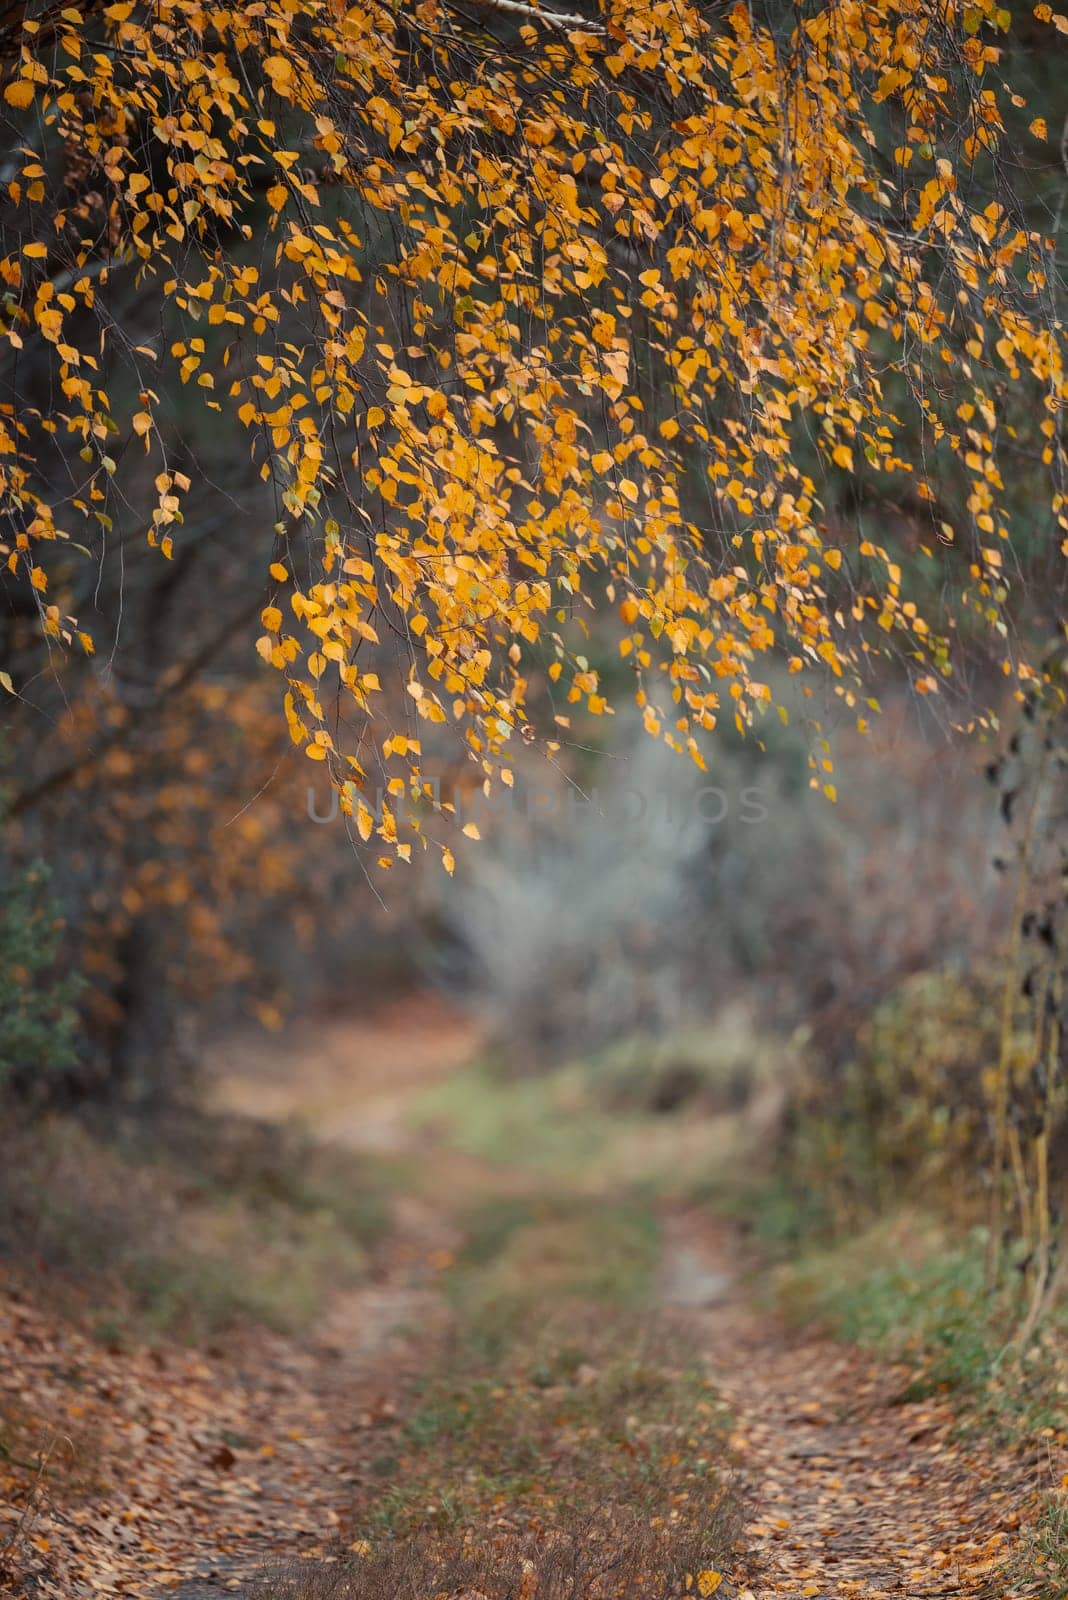 Birch tree branches with yellow leaves above dirt road by VitaliiPetrushenko